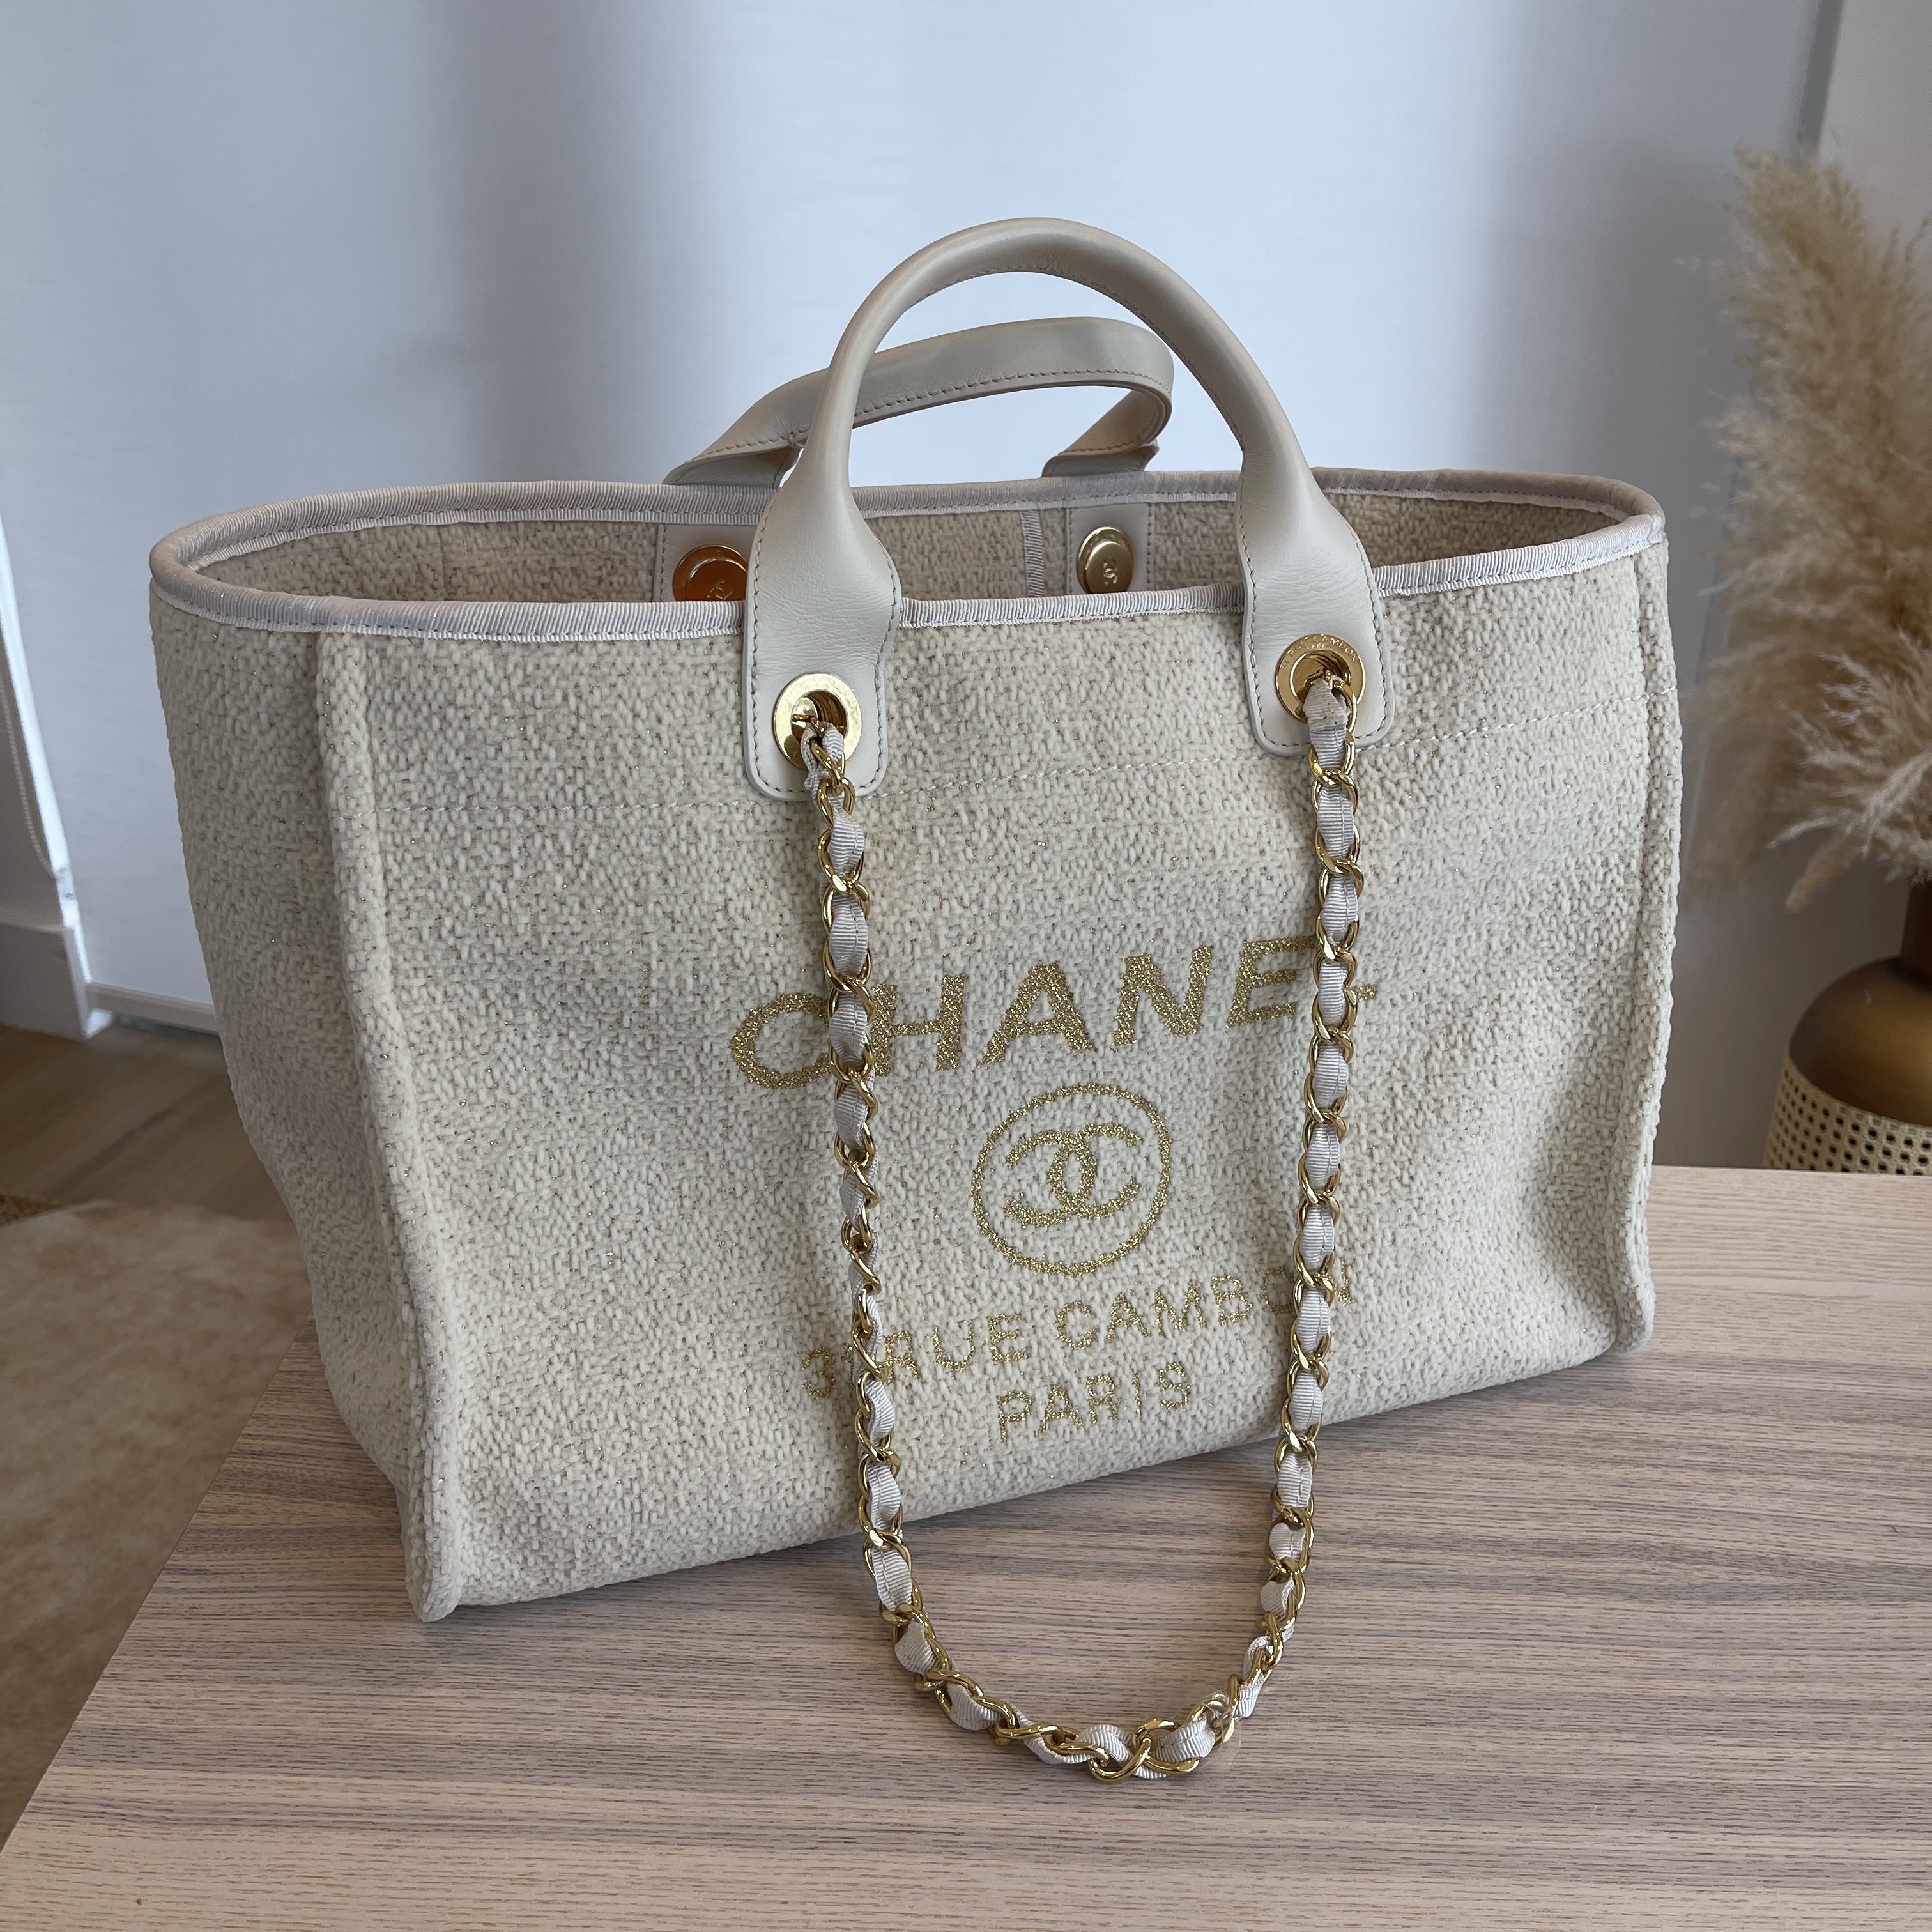  Chanel Deauville Small Studded Ivory Tote